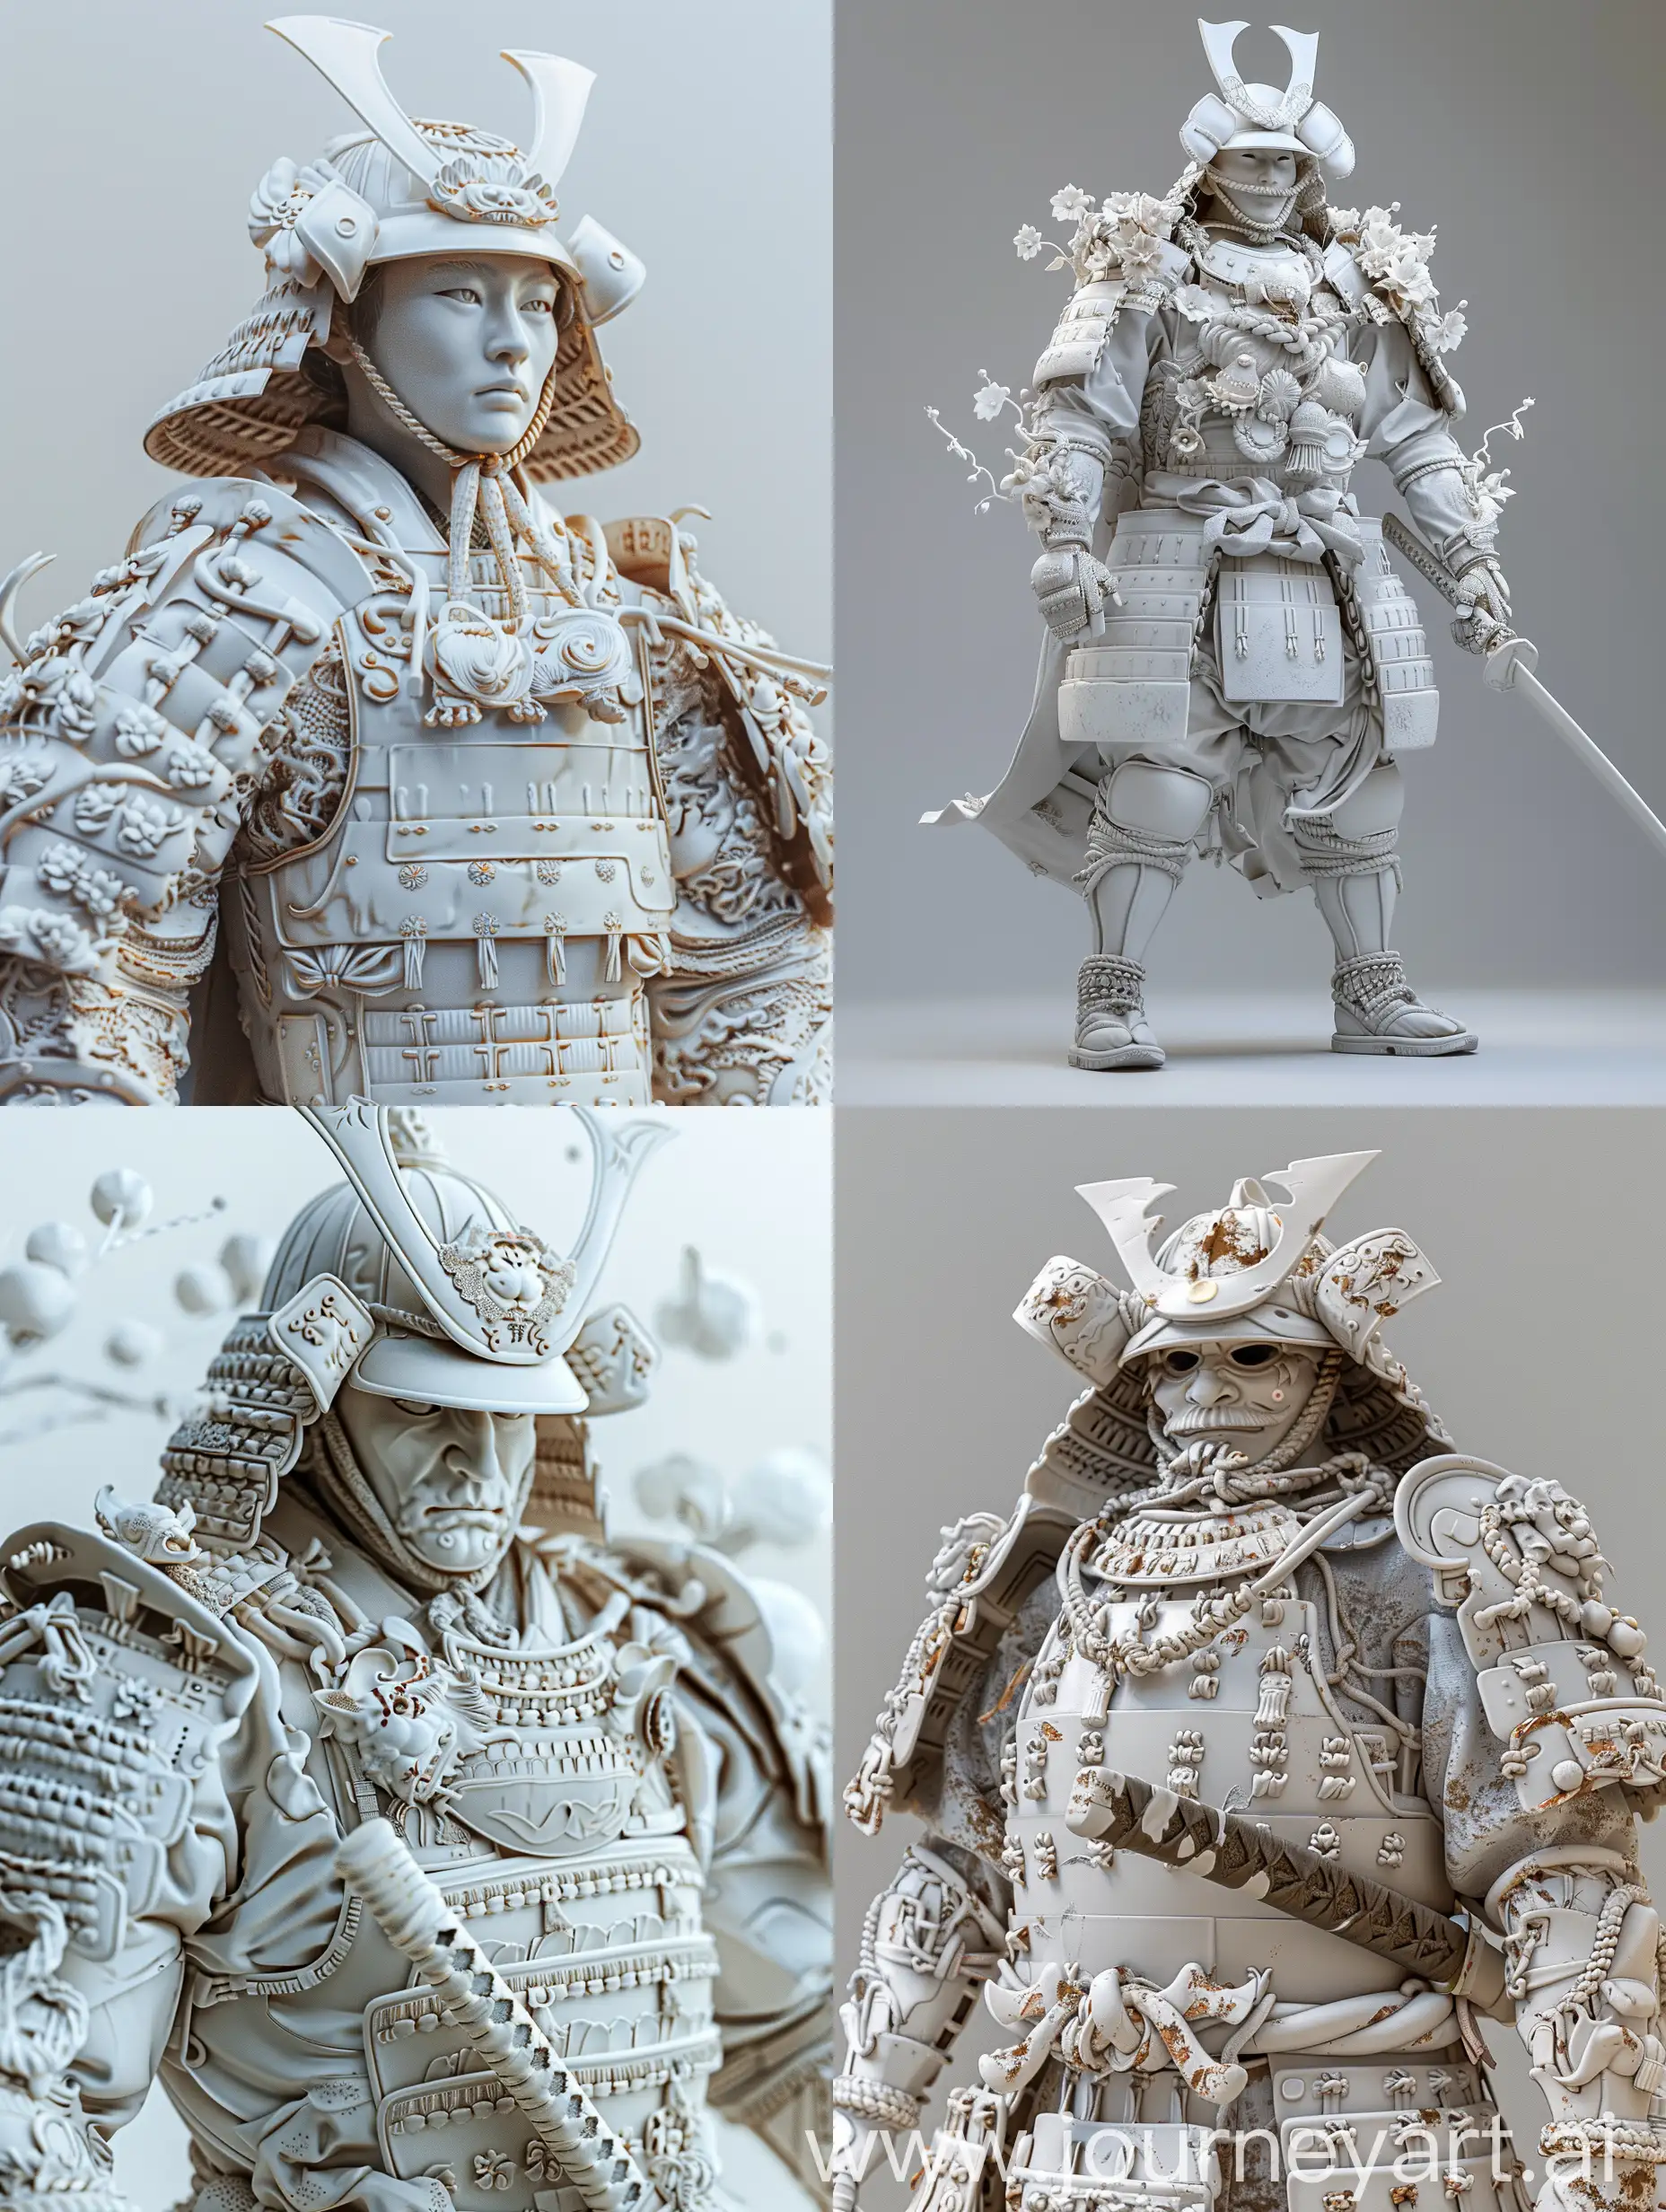 samurai with armor made of porcelain, hyper realistic, 3d.